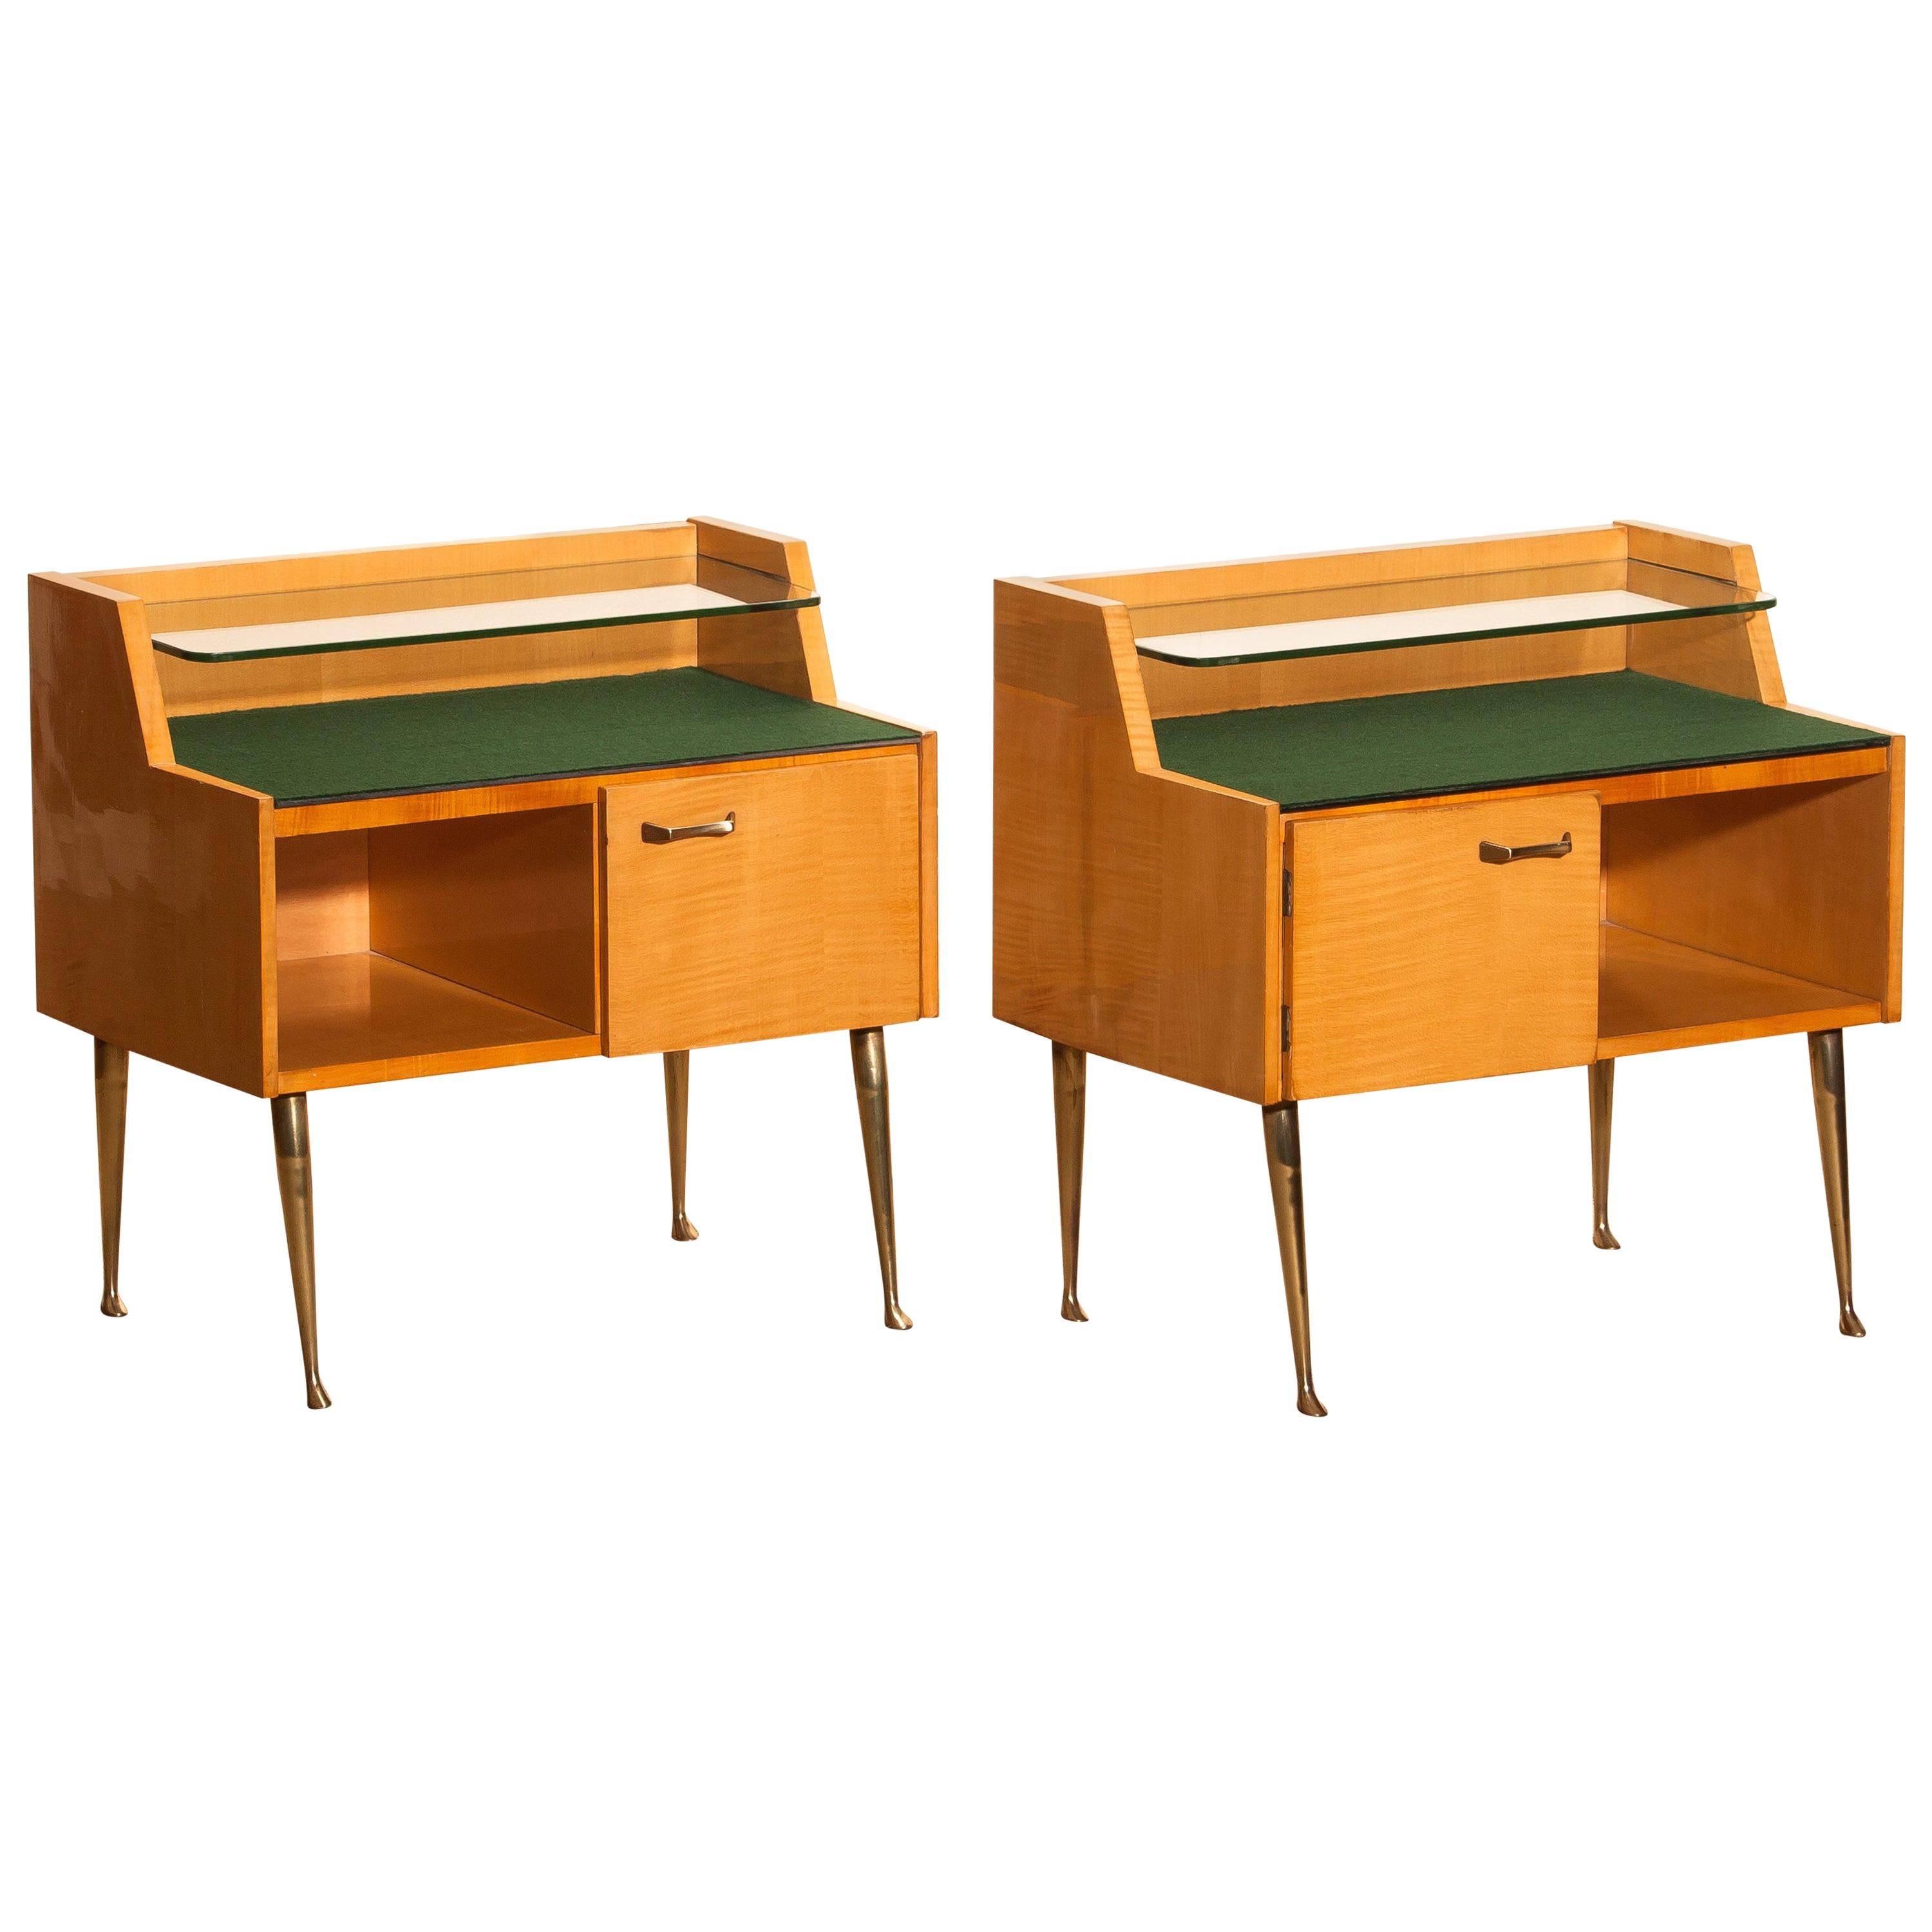 Beautiful set of two Italian midcentury bedside tables in maple with brass legs and brass handle designed by Paolo Buffa, Italy, 1950s.
Both are in good condition.
The top is covered with green felt and In addition, there's a smaller glass shelf